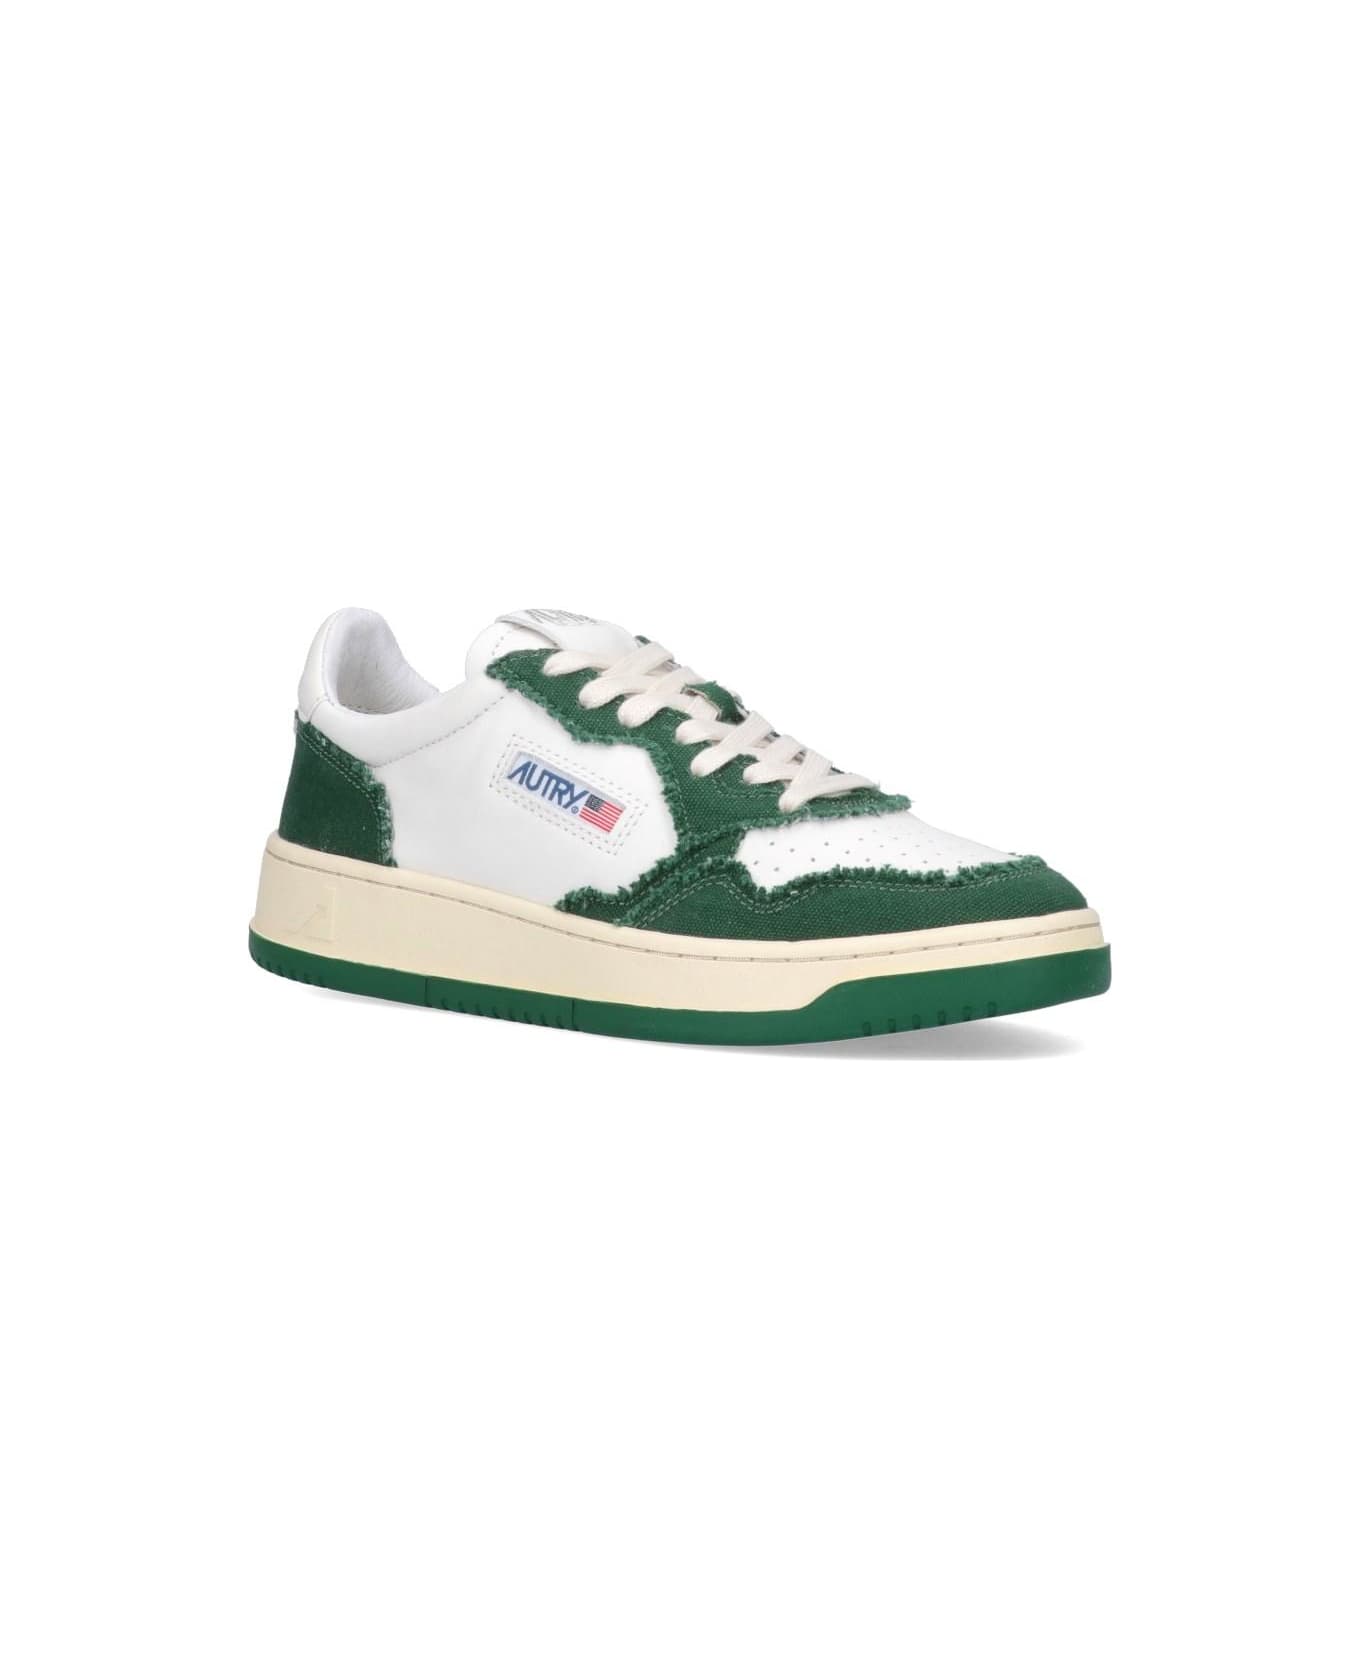 Autry Sneakers In White And Green Leather And Canvas - Bianco Eden